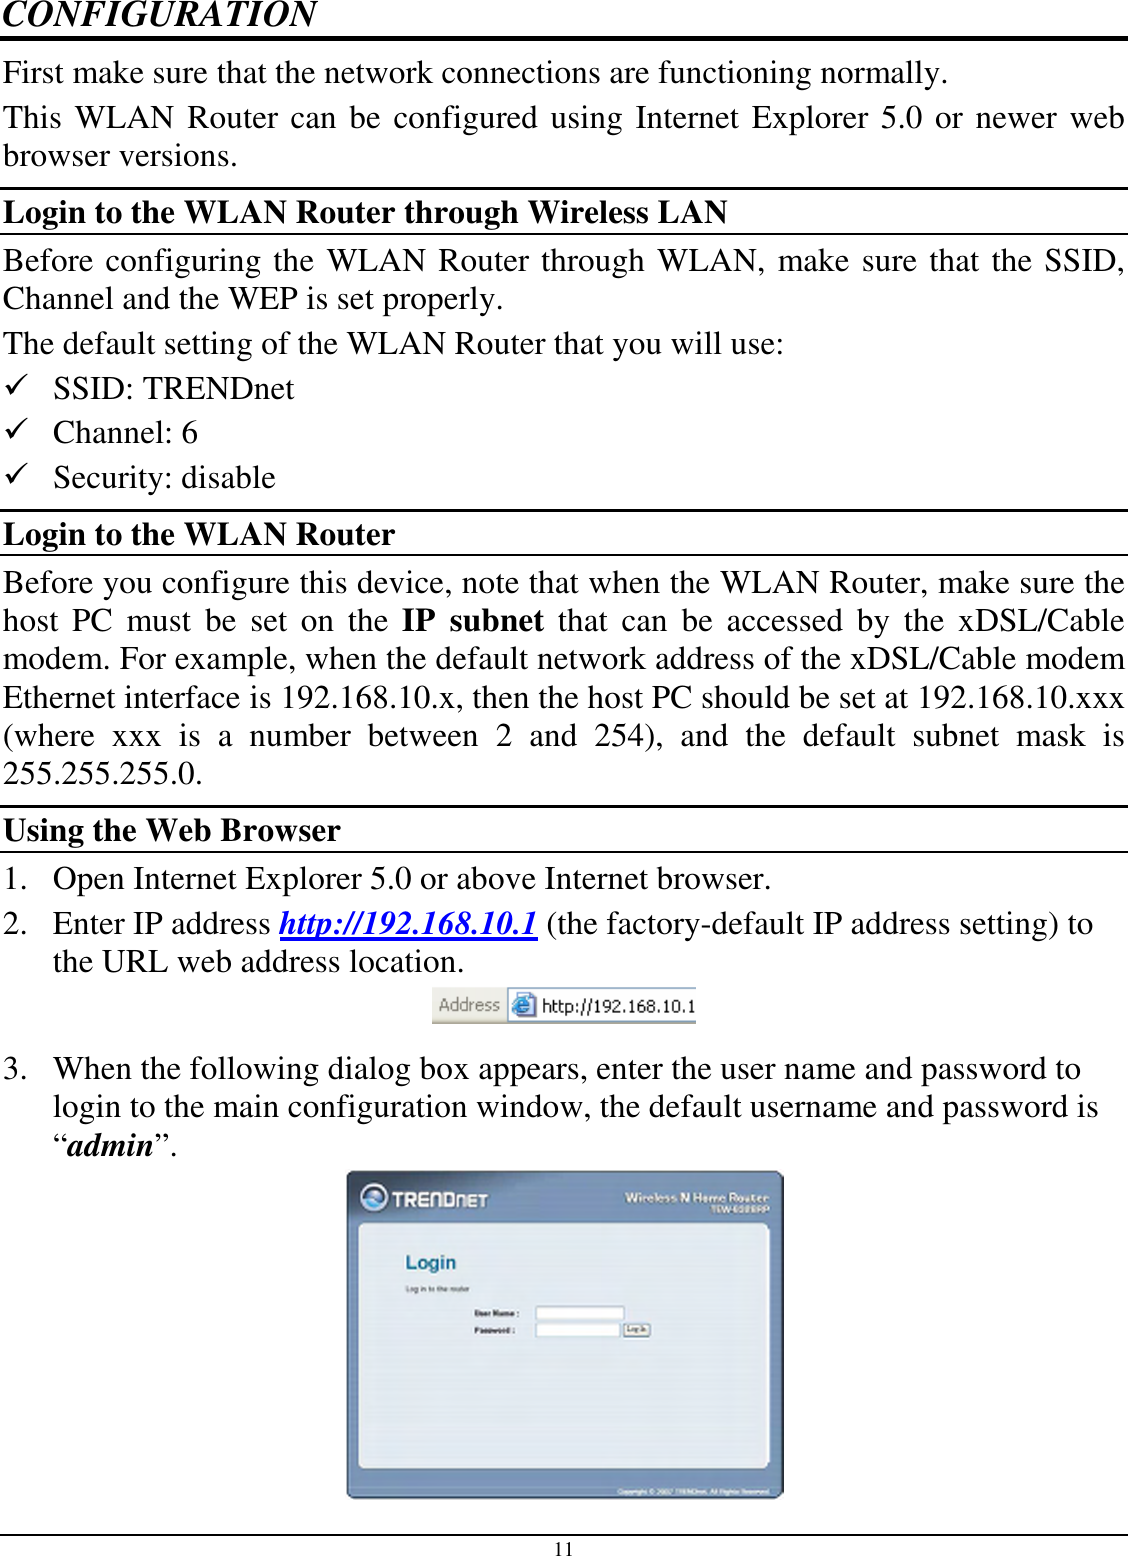 11 CONFIGURATION First make sure that the network connections are functioning normally.  This WLAN Router can be configured using Internet Explorer 5.0 or newer web browser versions. Login to the WLAN Router through Wireless LAN Before configuring the WLAN Router through WLAN, make sure that the SSID, Channel and the WEP is set properly. The default setting of the WLAN Router that you will use:  SSID: TRENDnet  Channel: 6  Security: disable Login to the WLAN Router Before you configure this device, note that when the WLAN Router, make sure the host  PC  must  be  set  on  the  IP  subnet  that  can  be  accessed  by  the  xDSL/Cable modem. For example, when the default network address of the xDSL/Cable modem Ethernet interface is 192.168.10.x, then the host PC should be set at 192.168.10.xxx (where  xxx  is  a  number  between  2  and  254),  and  the  default  subnet  mask  is 255.255.255.0. Using the Web Browser 1. Open Internet Explorer 5.0 or above Internet browser. 2. Enter IP address http://192.168.10.1 (the factory-default IP address setting) to the URL web address location.  3. When the following dialog box appears, enter the user name and password to login to the main configuration window, the default username and password is “admin”.  